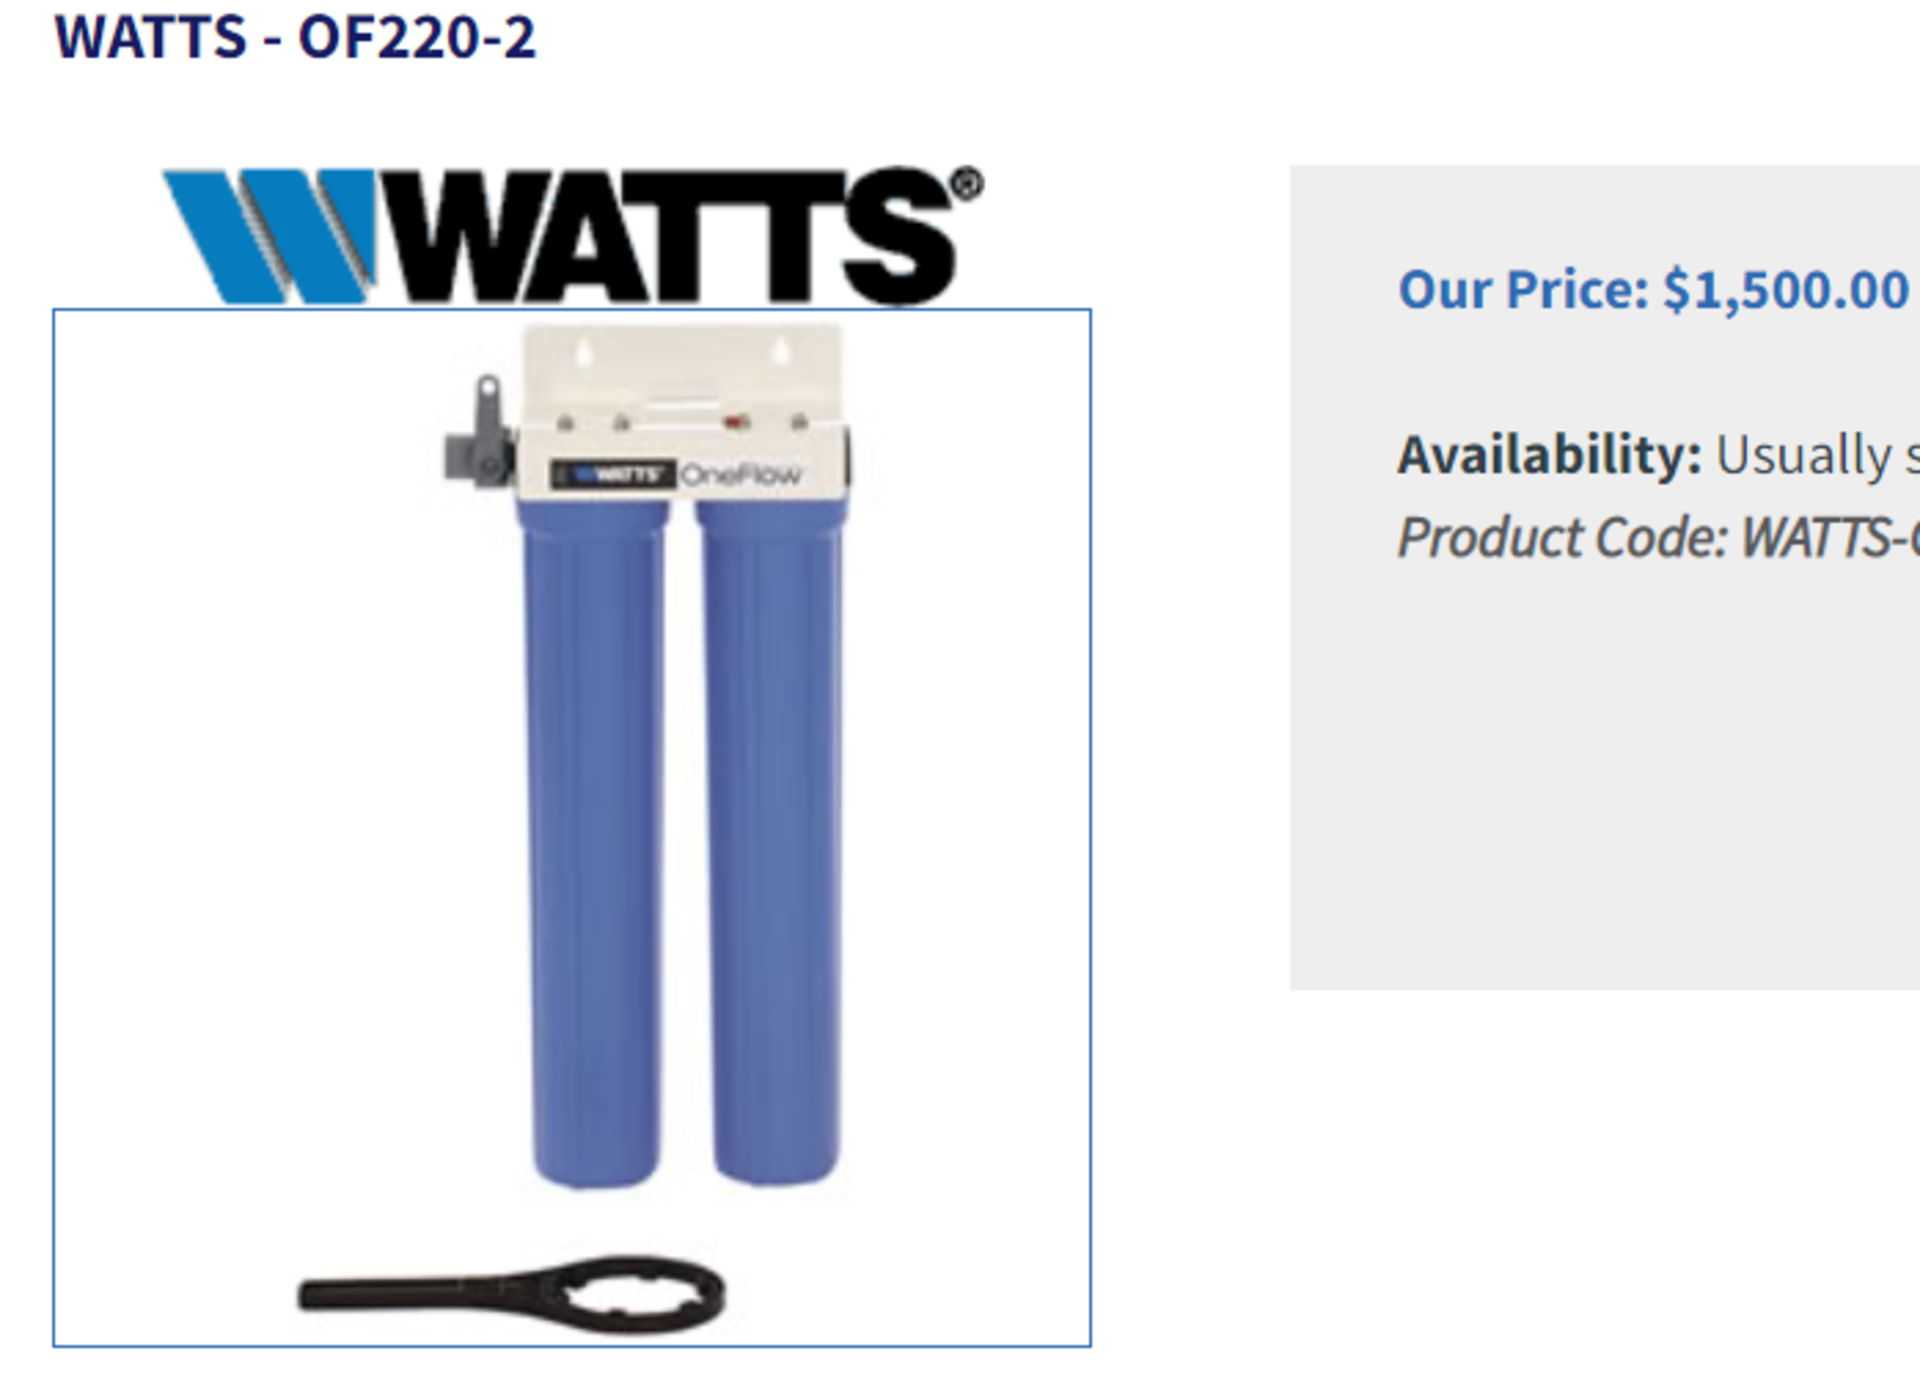 Brand New Watts OF220-2 OneFlow Anti Scale System. RRP £1,500.00 Provides protection from scale